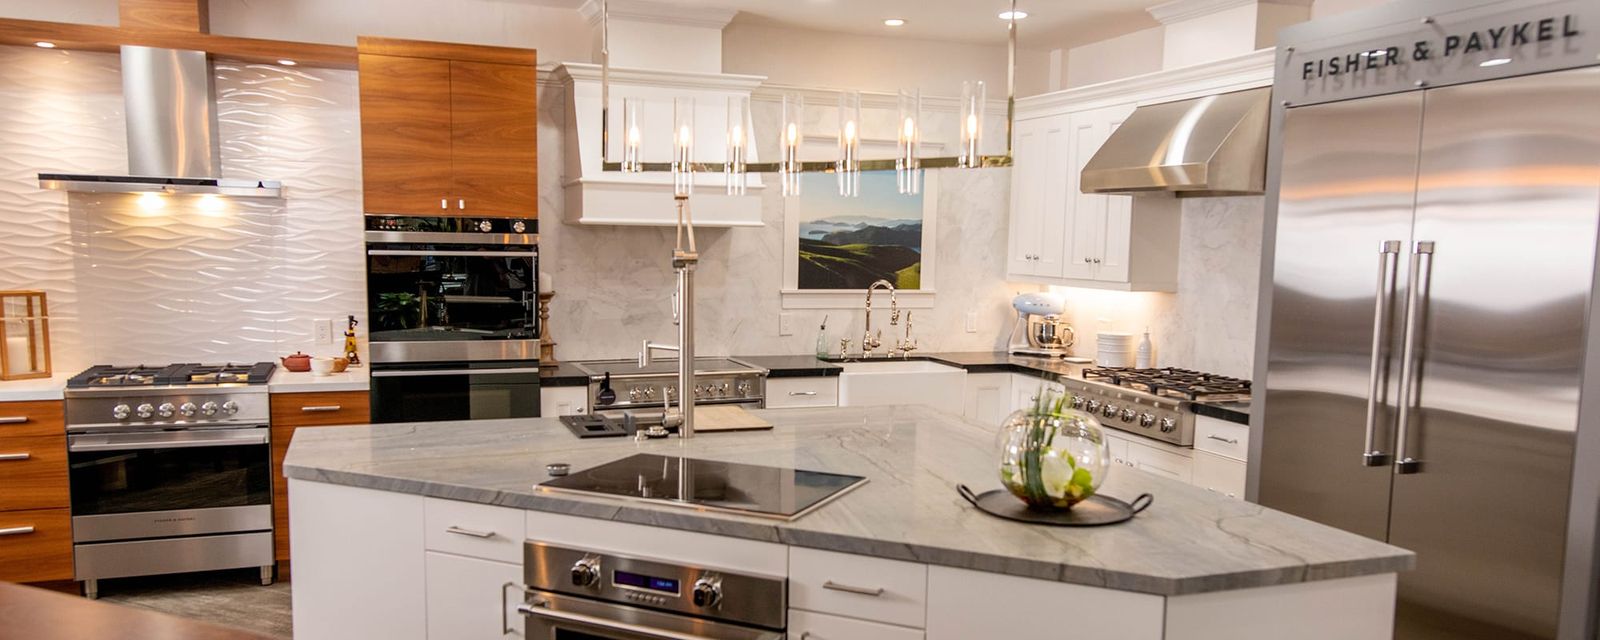 How Smeg Appliances Bring You the Retro Kitchen of Your Dreams, Friedmans  Appliance, Bay Area